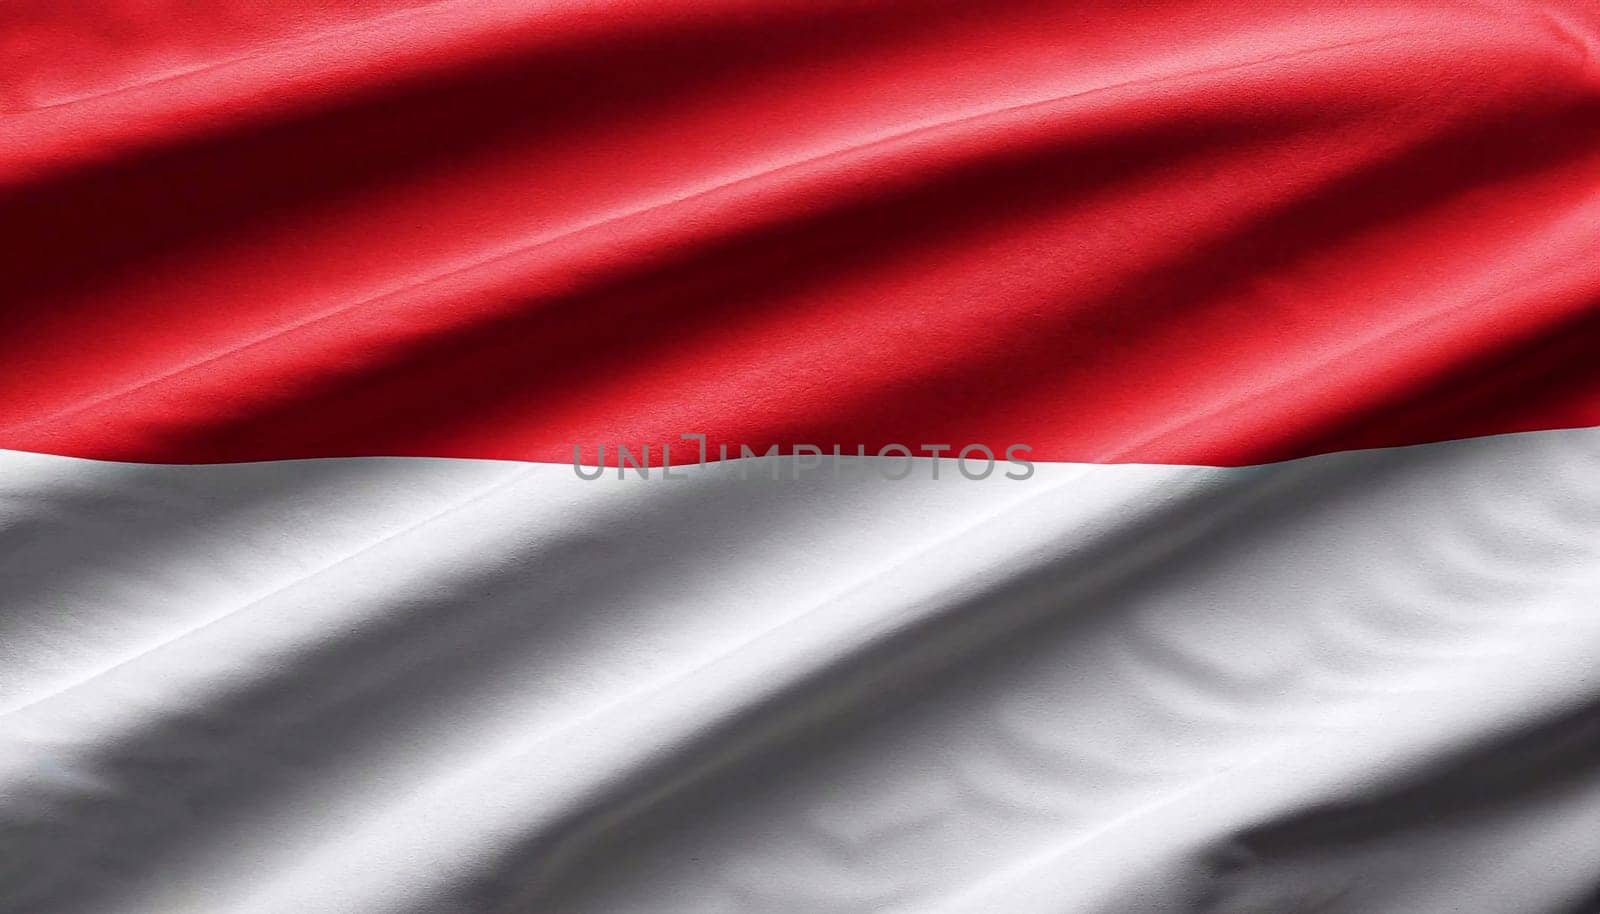 the flag of Indonesia_with pleats with visible satin texture by dec925